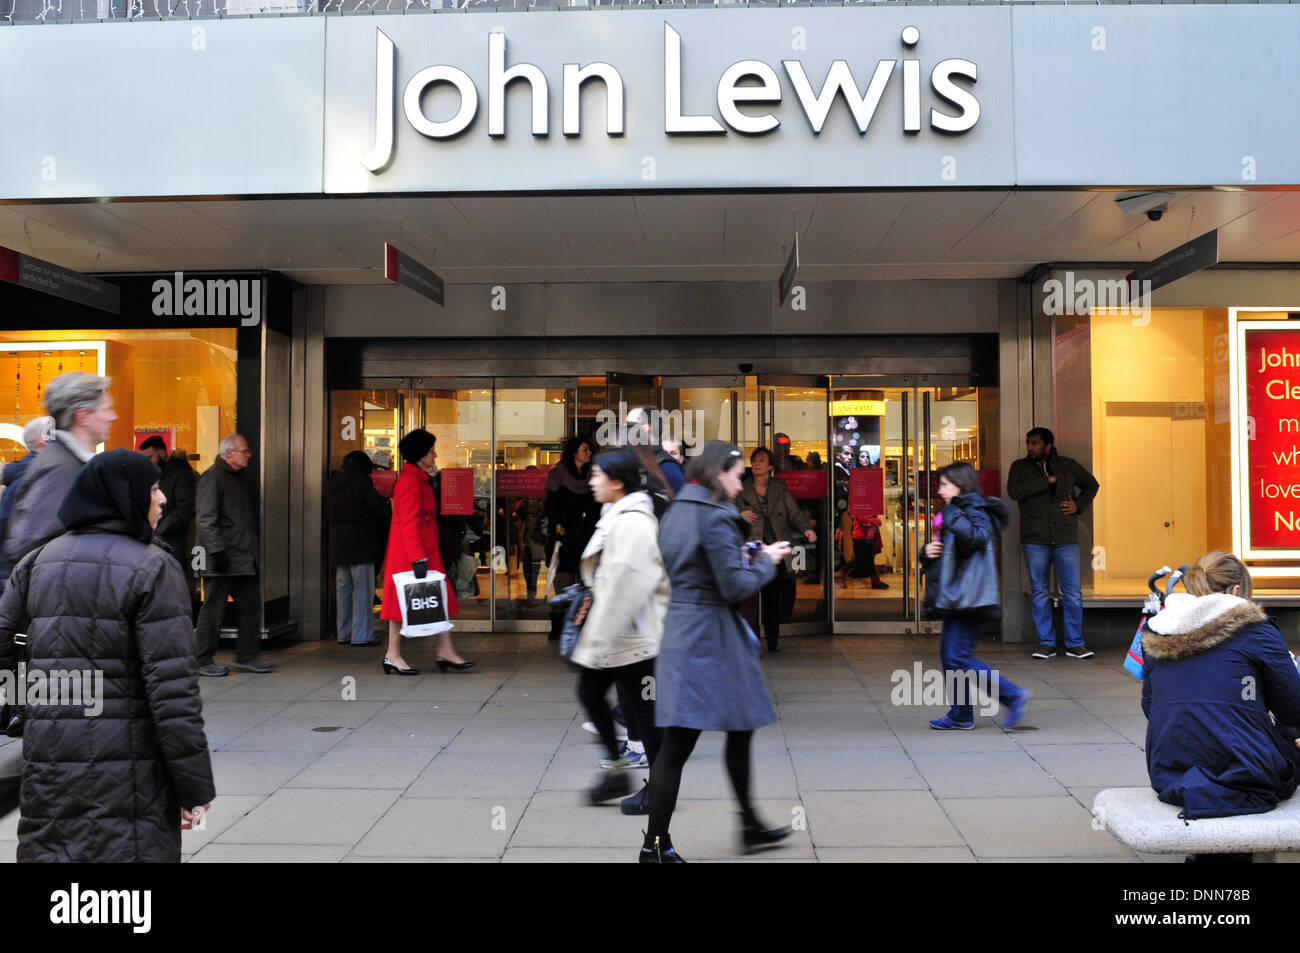 A front view of John Lewis in Oxford Street, London Stock Photo